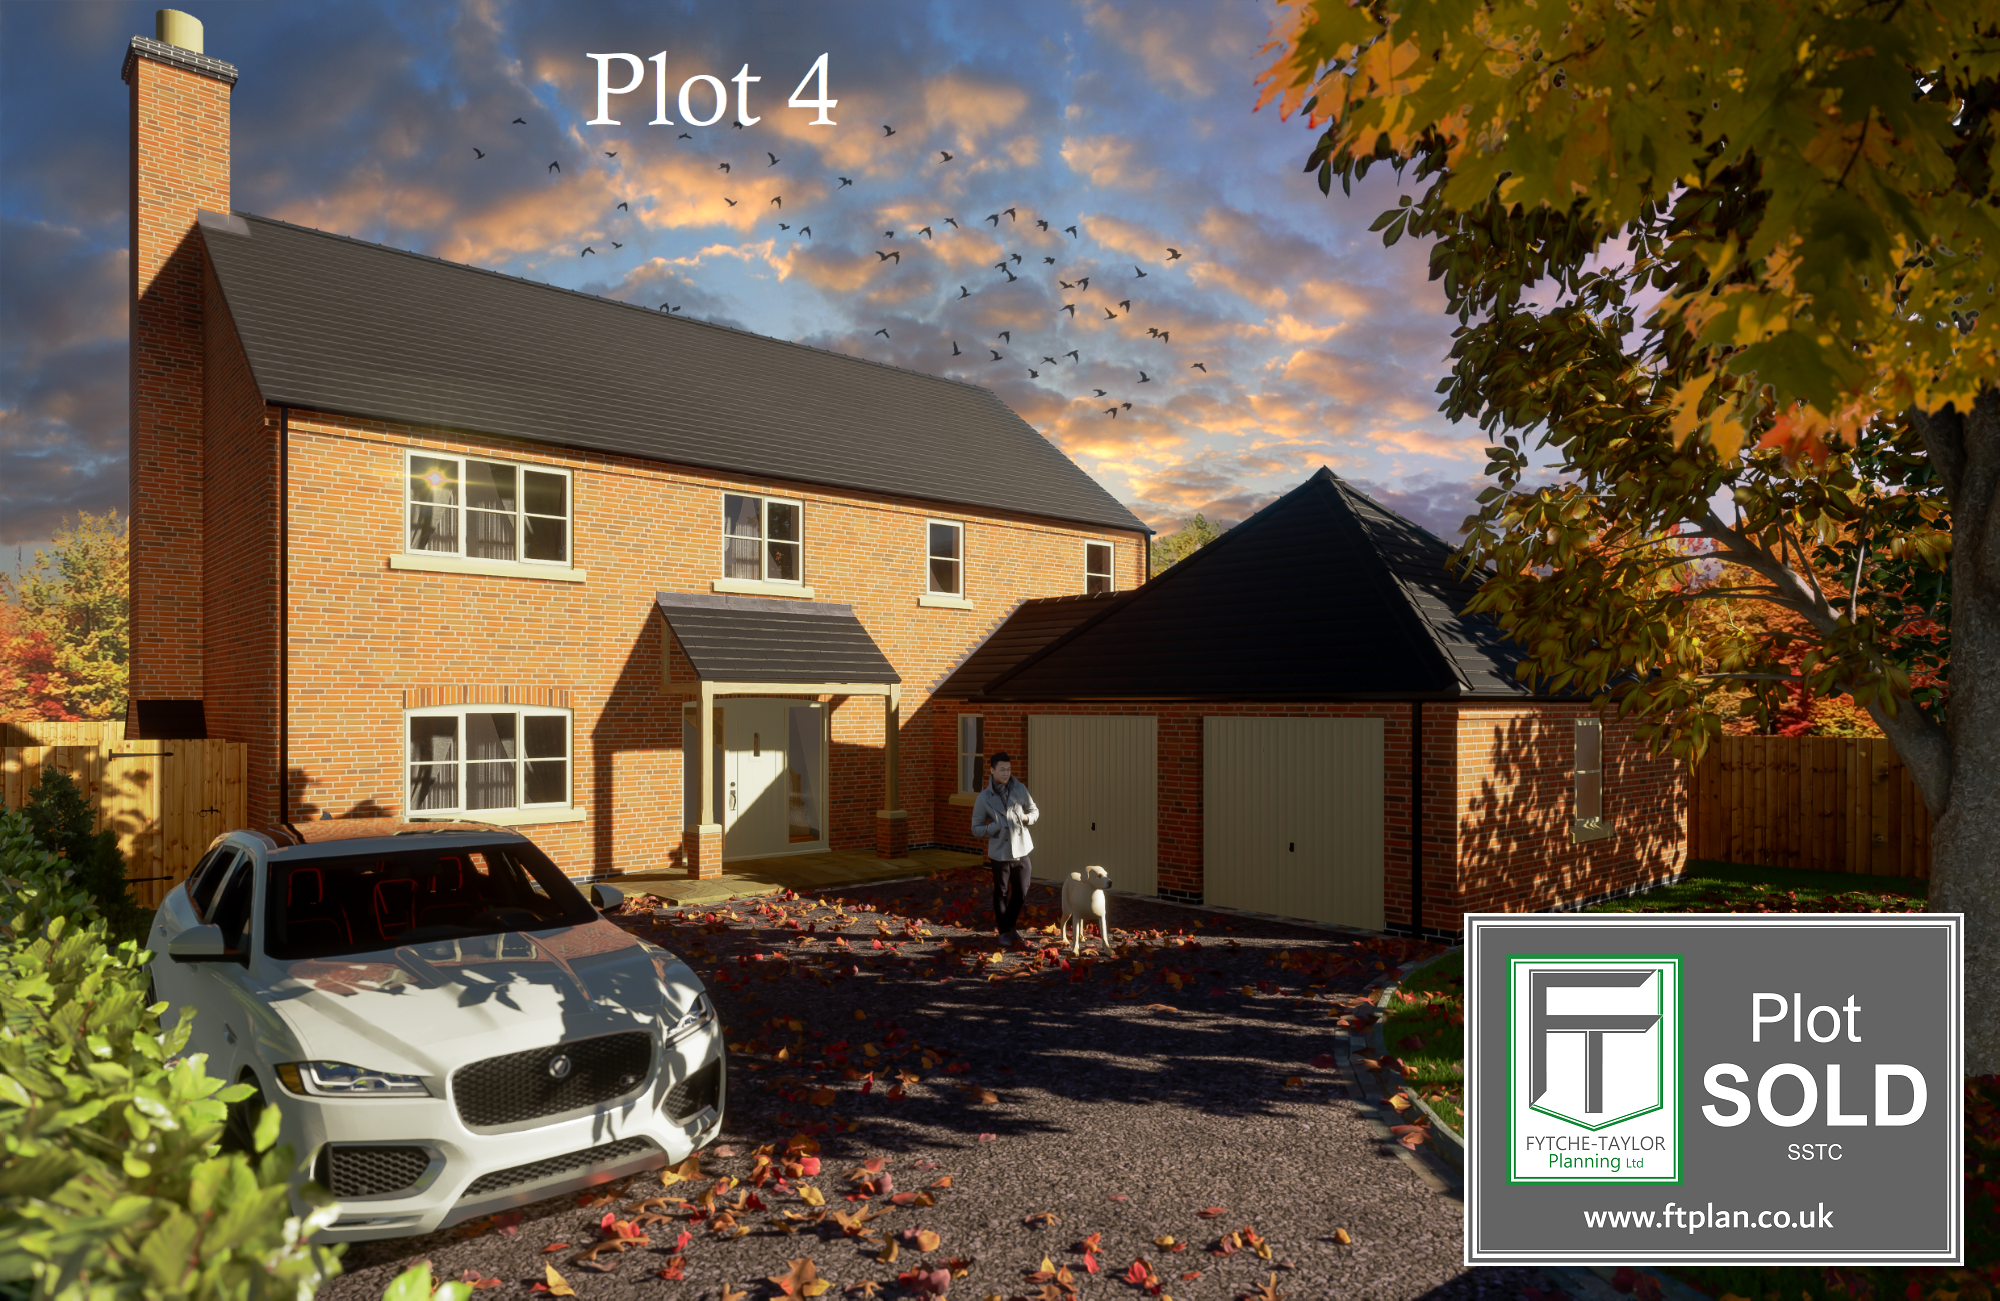 Plots for sale in an exclusive development of 5 bespoke family homes, each with full planning permission for a 5 bed detached property